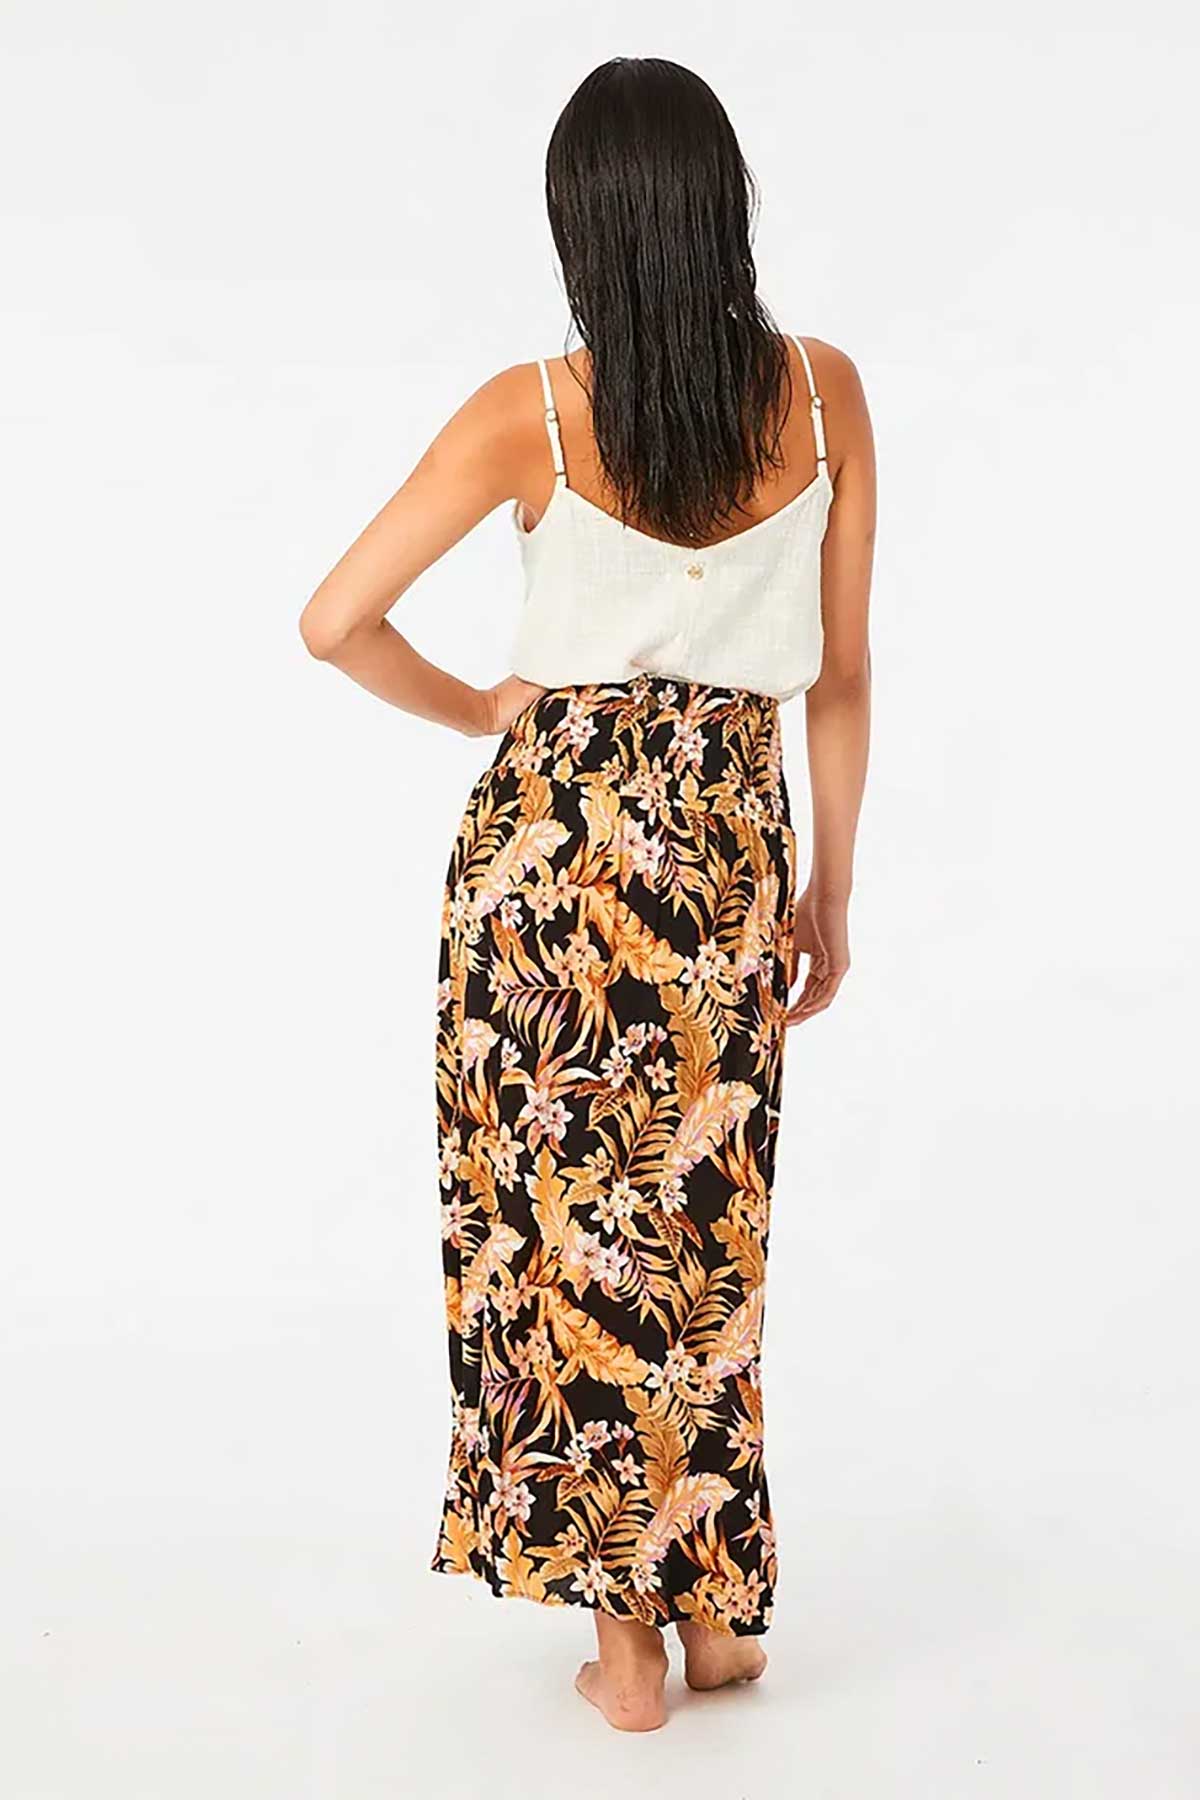 Rip Curl Skirt Sunday Swell Updown, black tropical floral print.